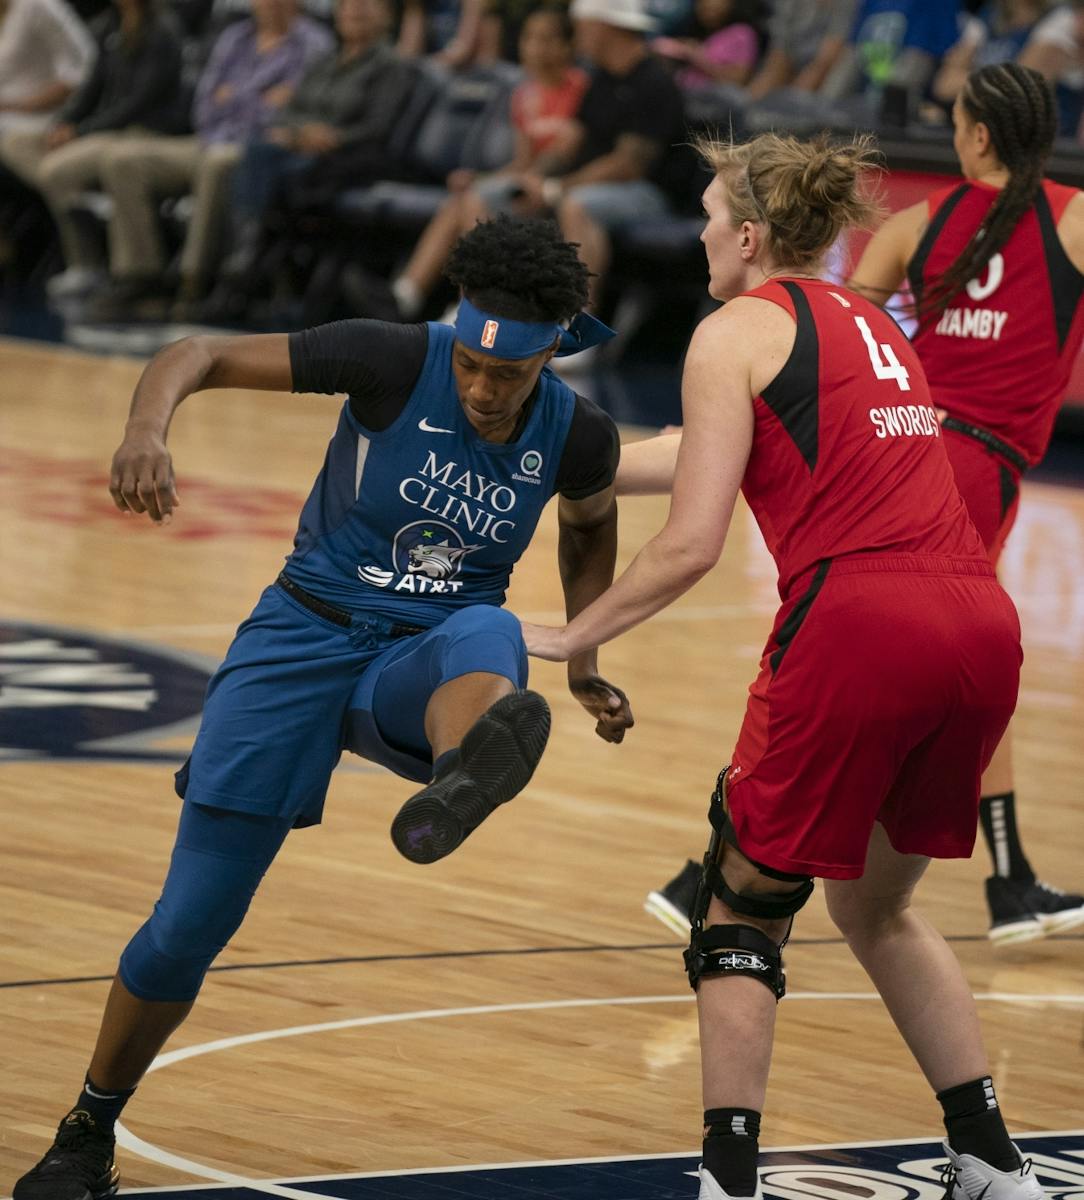 Las Vegas Aces center Carolyn Swords (4) was called for a first half foul while defending Minnesota Lynx center Sylvia Fowles (34) in the first half.